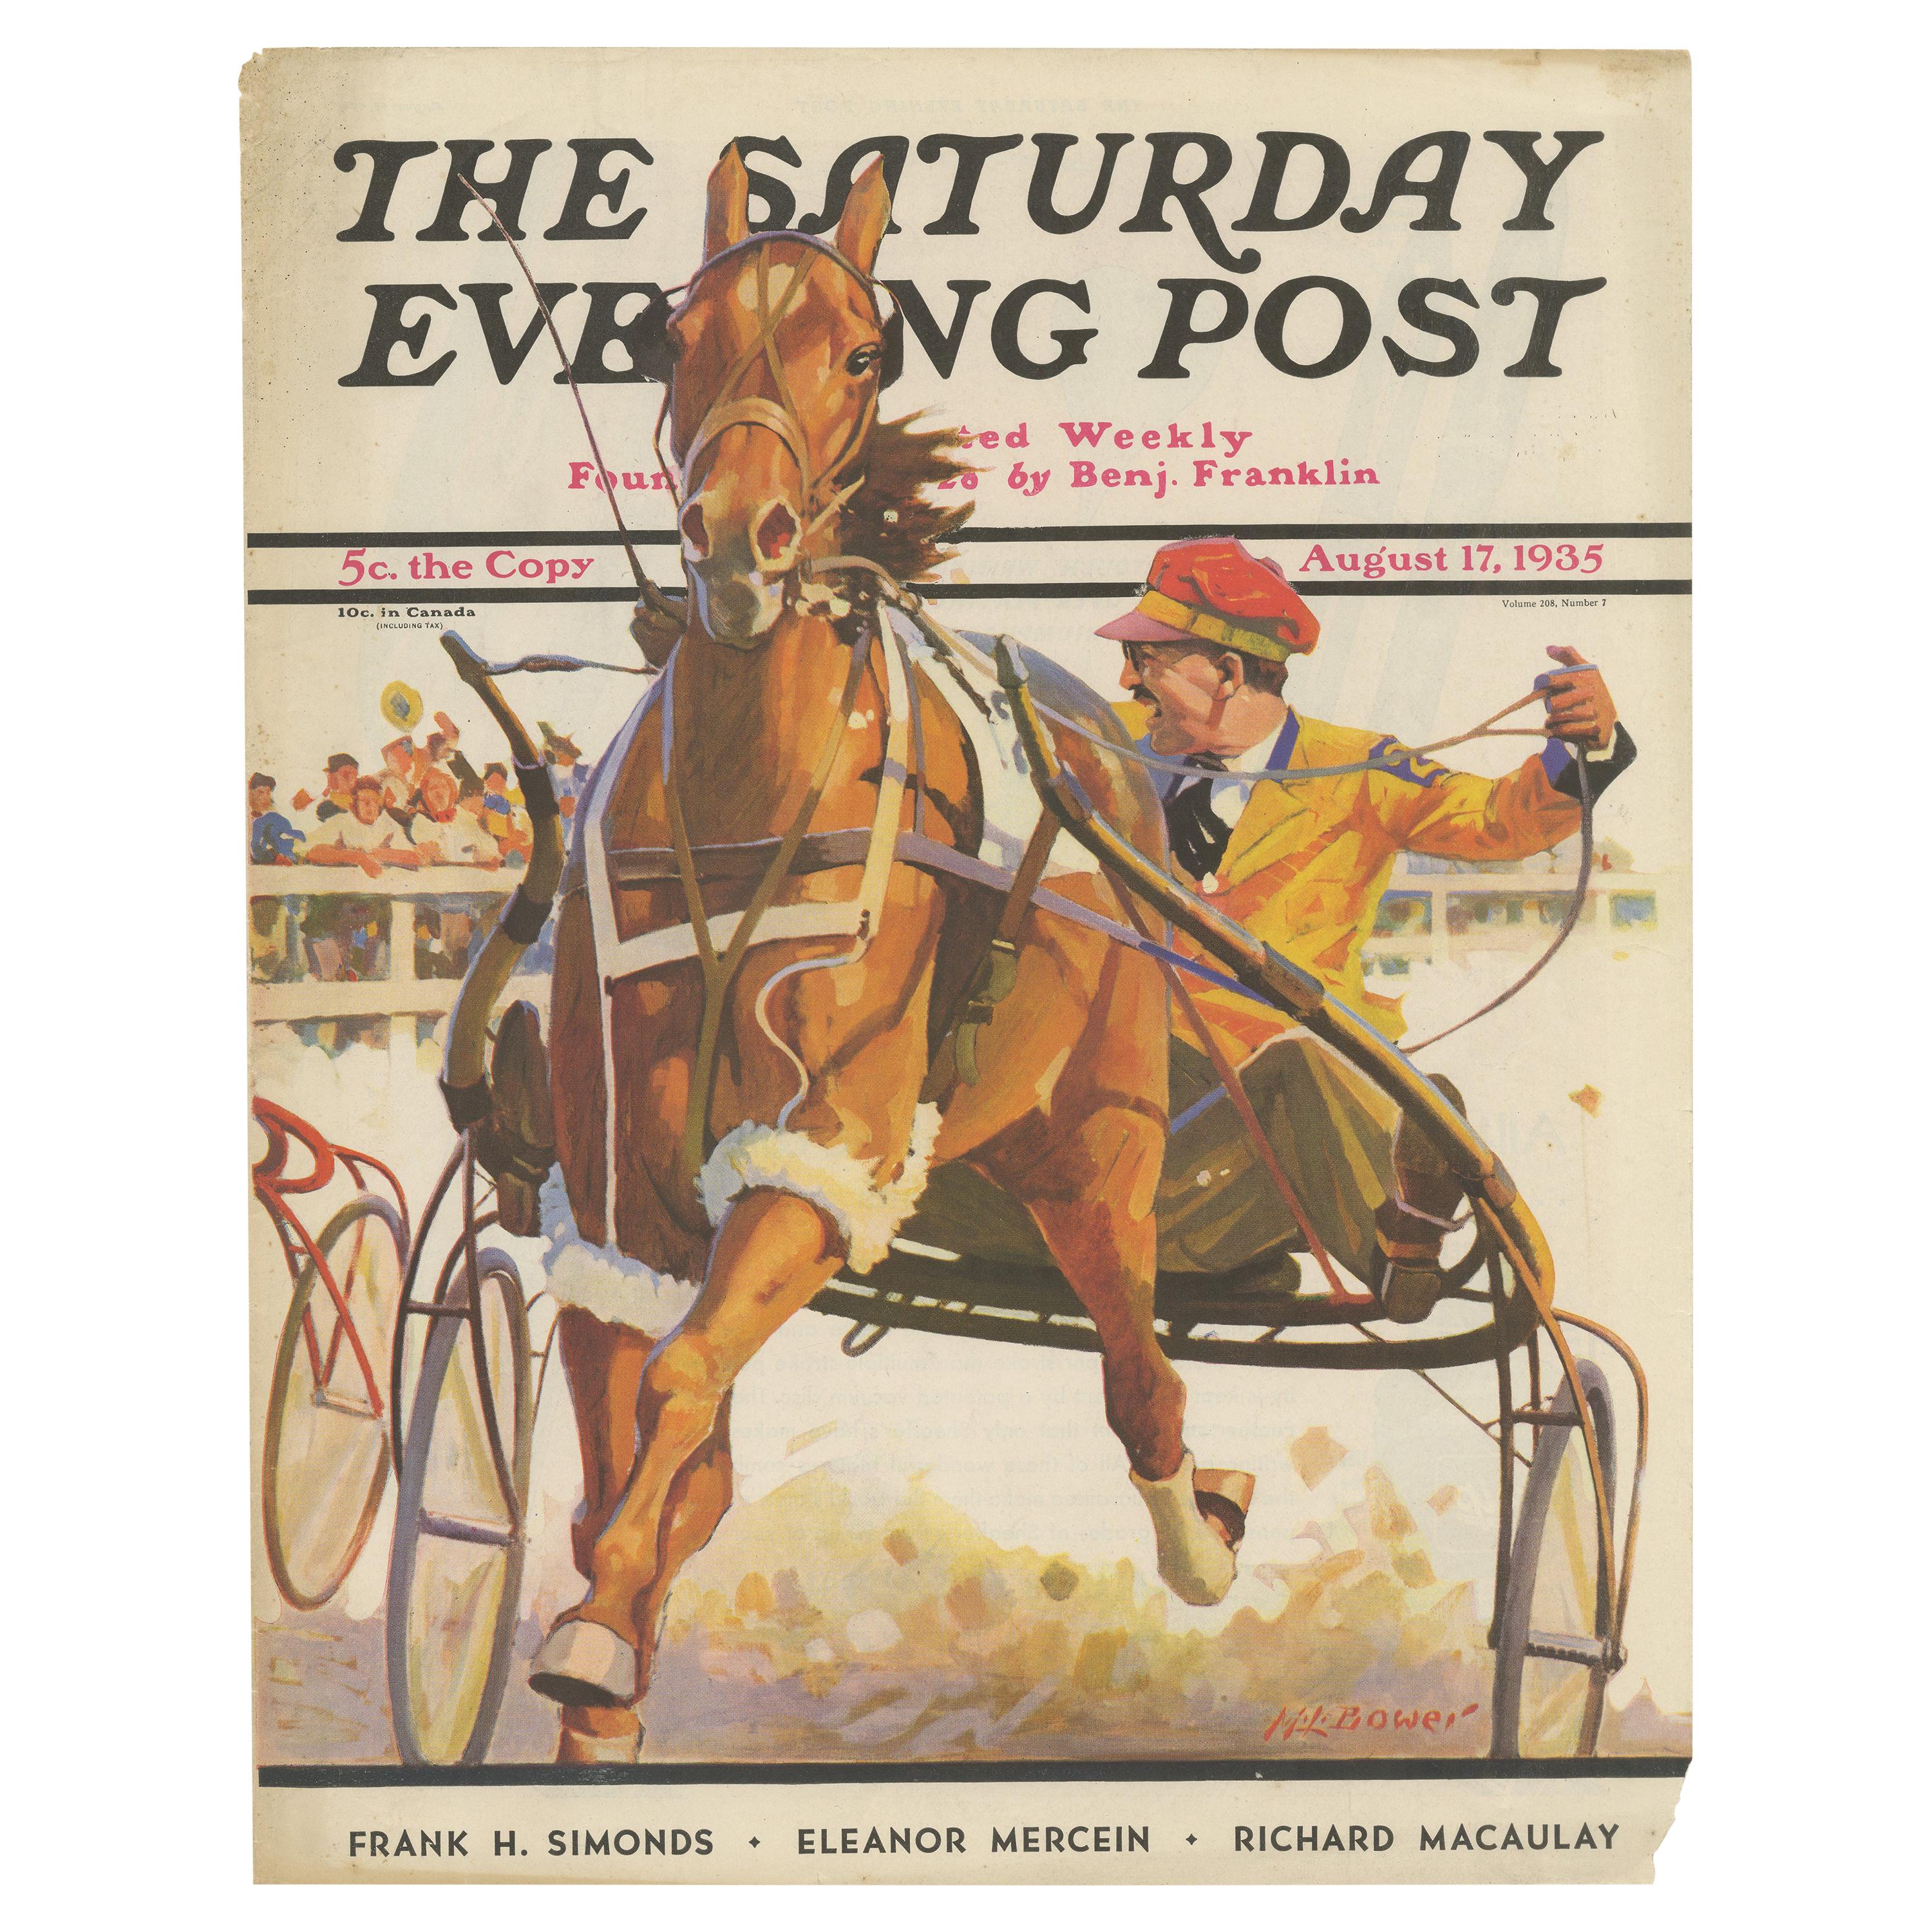 Vintage Print of a Horse Race 'The Saturday Evening Post' '1935'